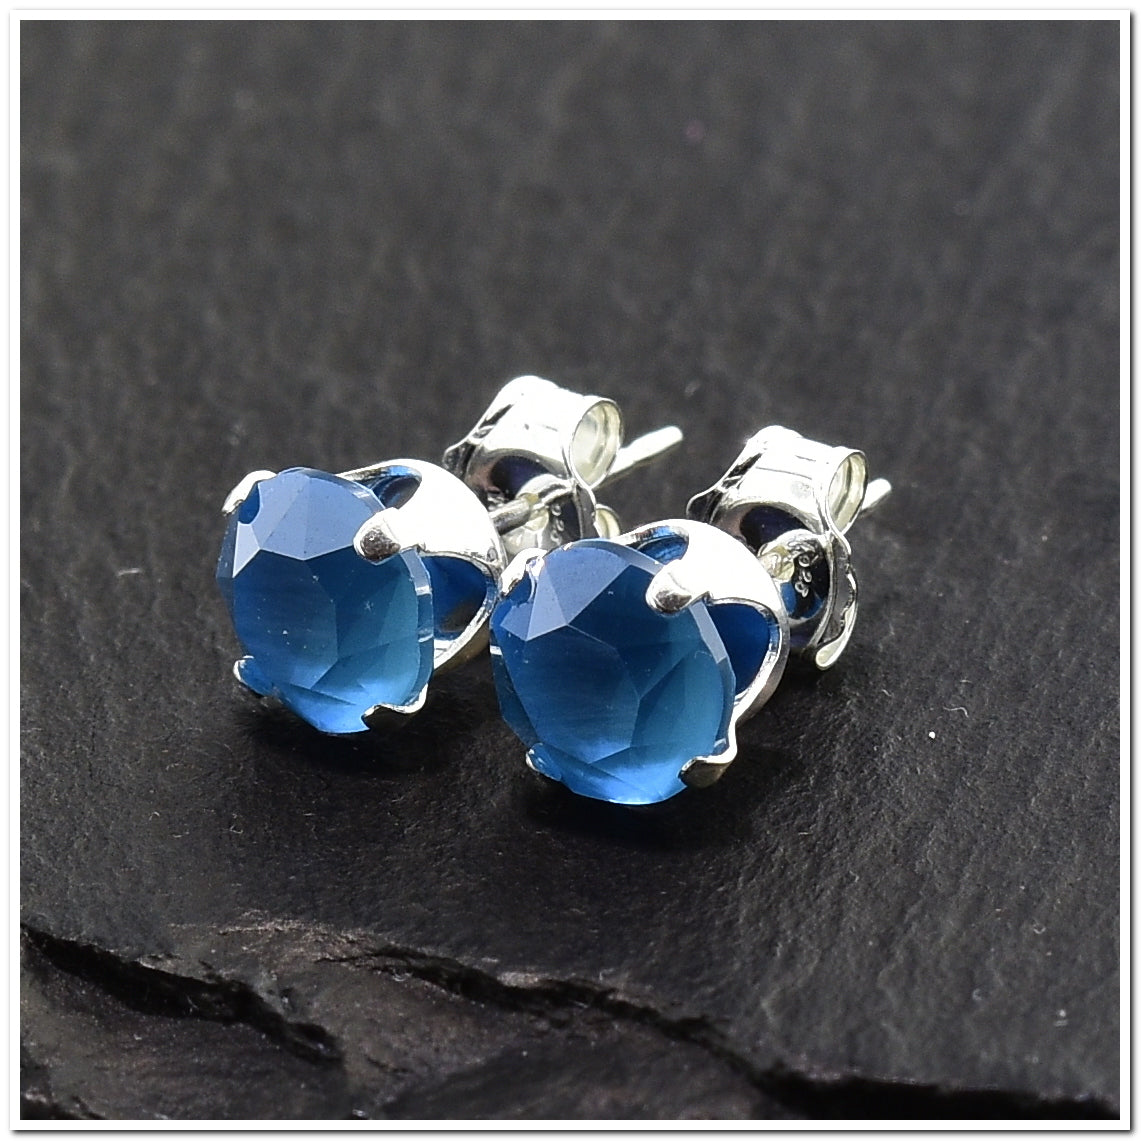 pewterhooter® Women's Classic Collection 925 Sterling silver earrings with sparkling Azure Blue crystals, packaged in a gift box for any occasion.